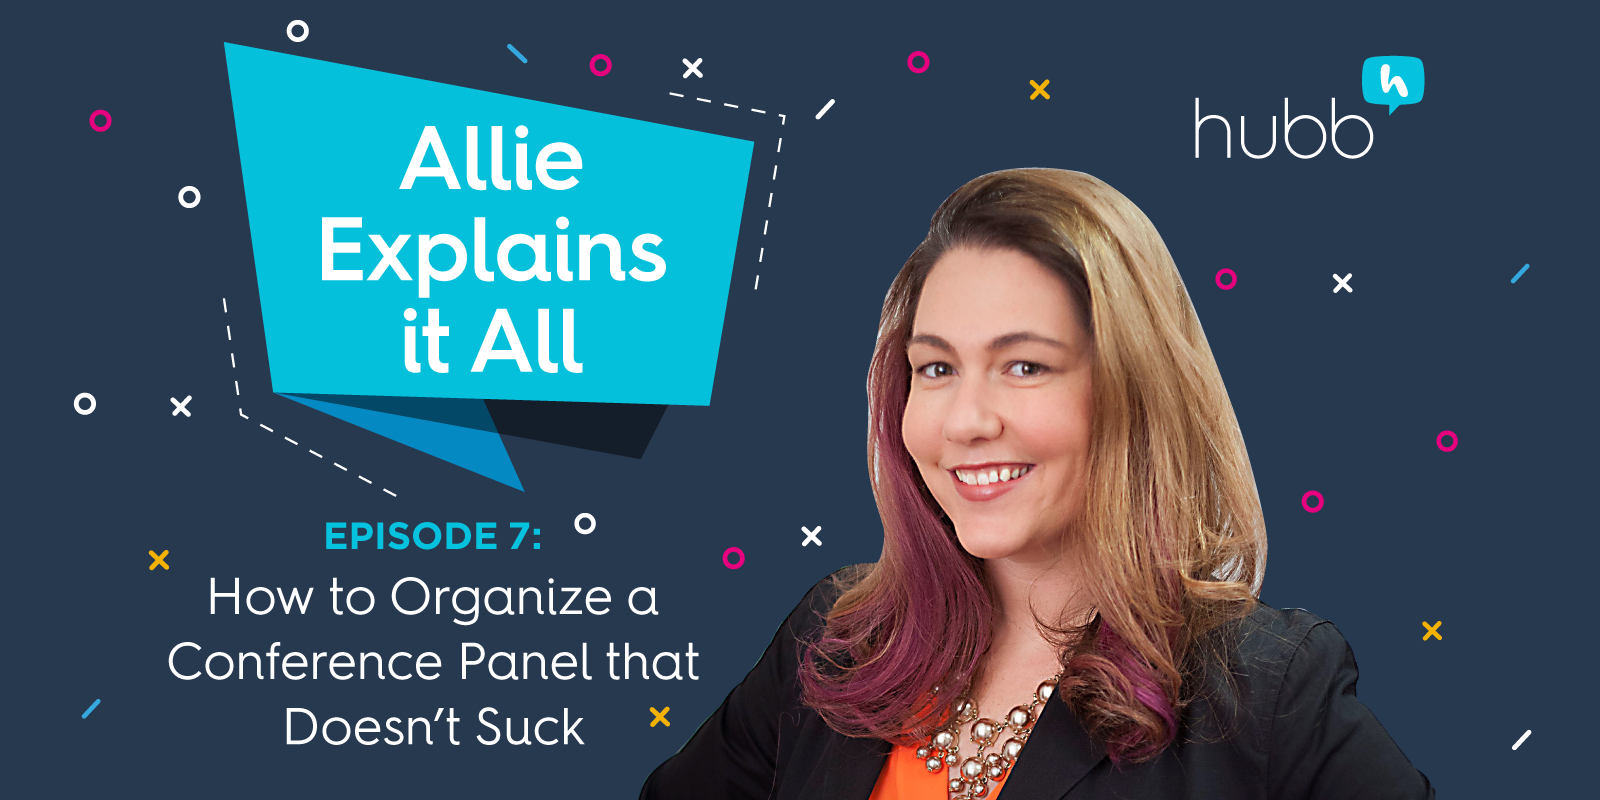 Allie Explains It All, Episode 7: How to Organize a Conference Panel That Doesn’t Suck